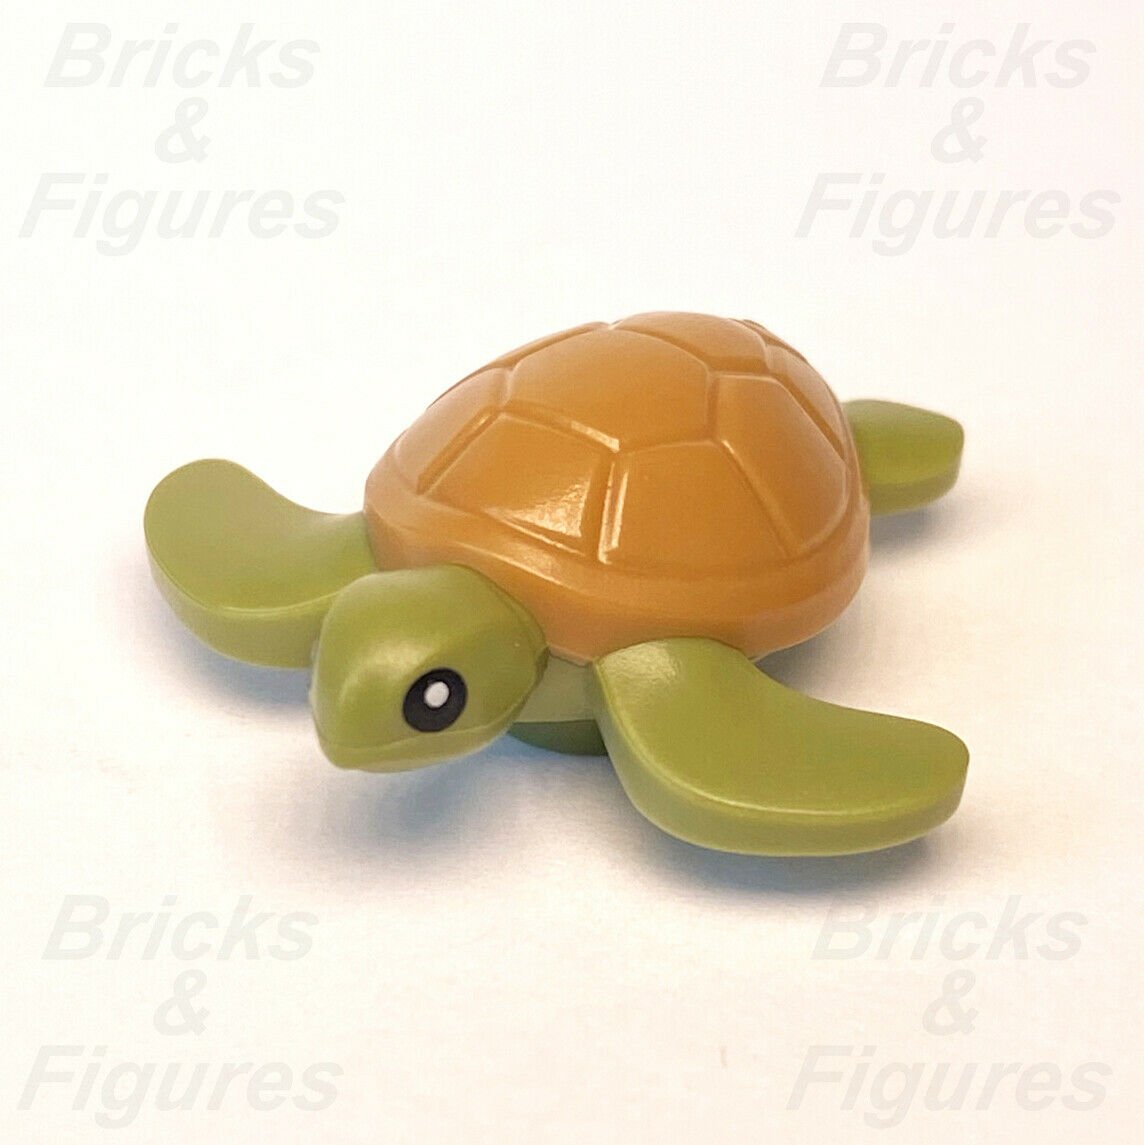 New Collectible Minifigures LEGO Sea Turtle From Series 20 Animal Part 71027 - Bricks & Figures